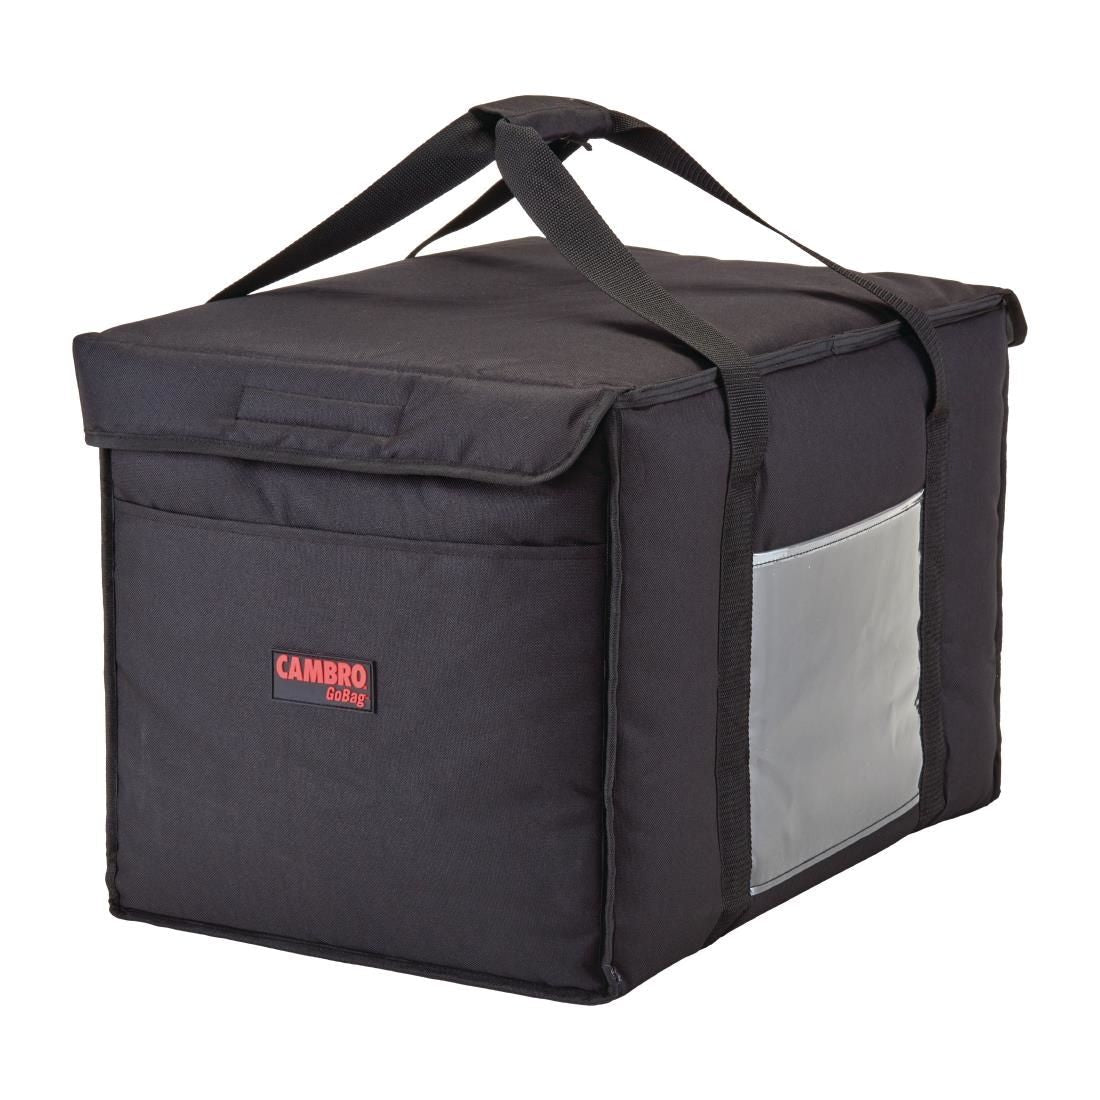 FB273 Cambro GoBag Top Loading Delivery Bag Medium JD Catering Equipment Solutions Ltd